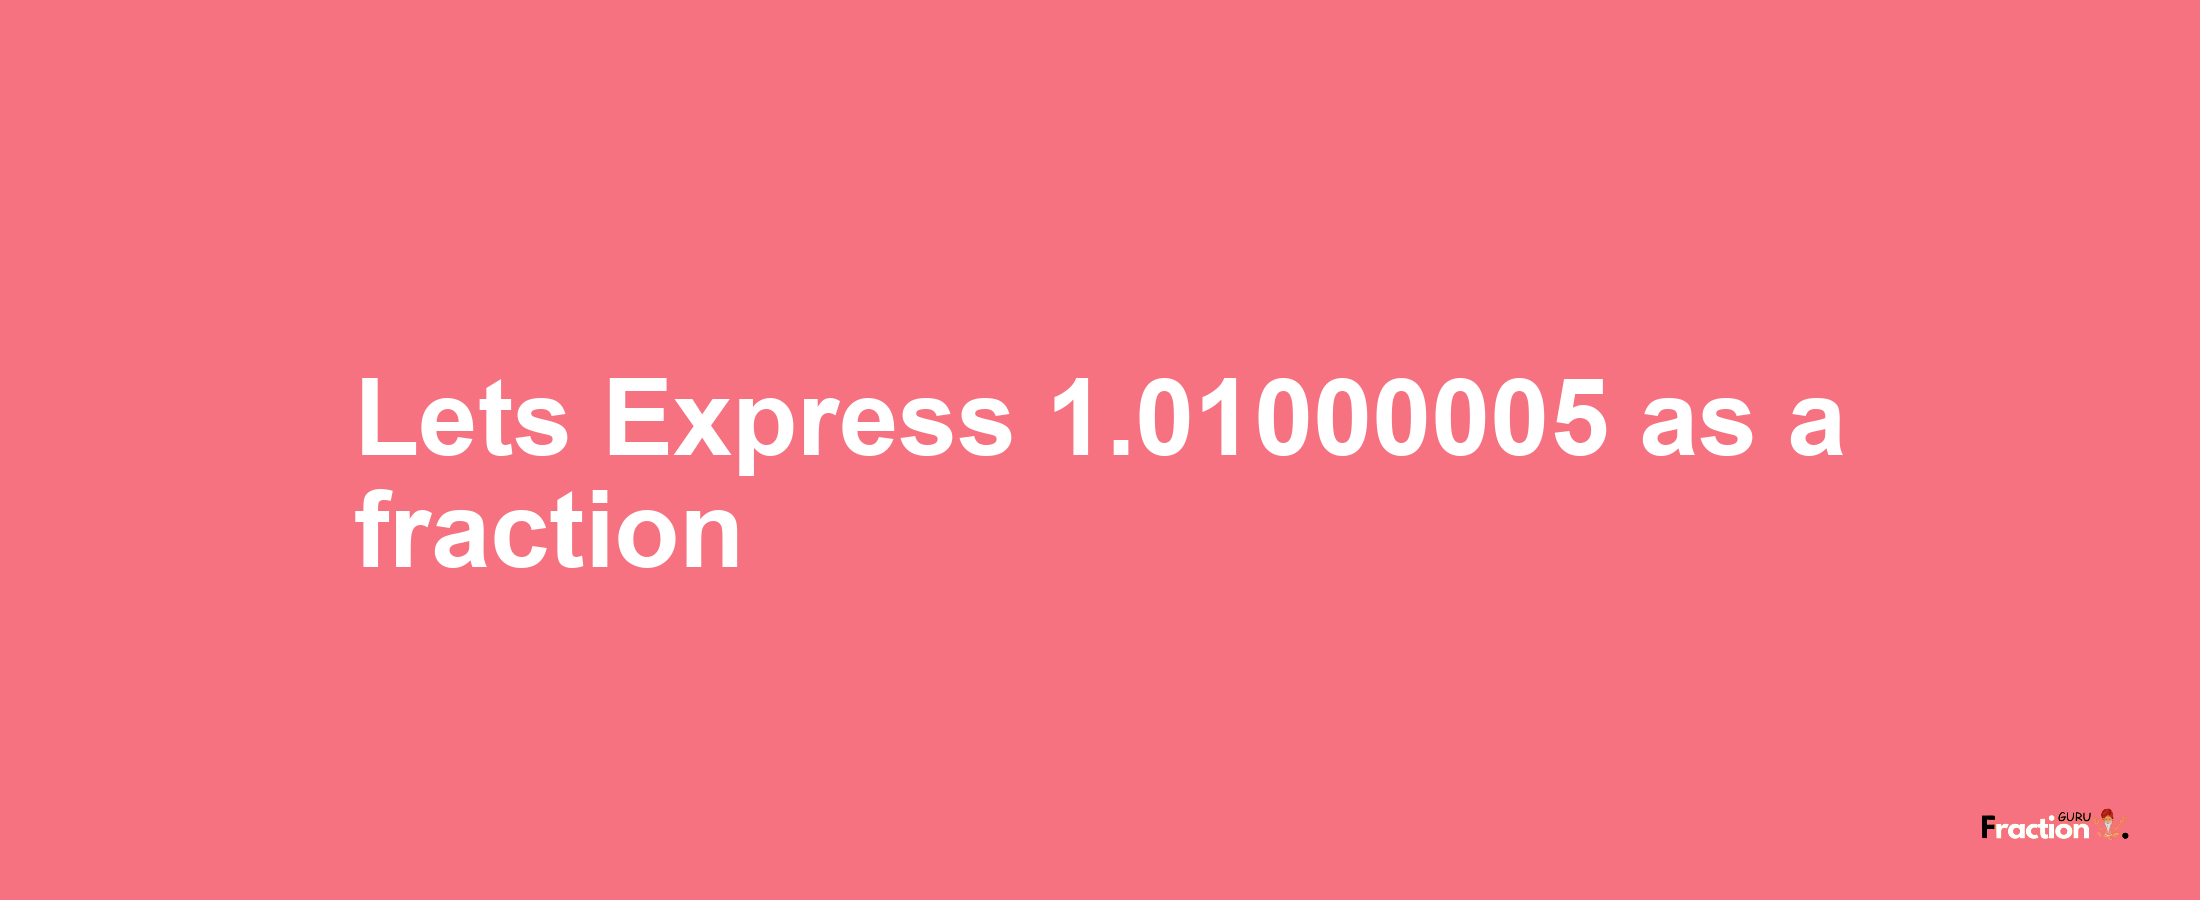 Lets Express 1.01000005 as afraction